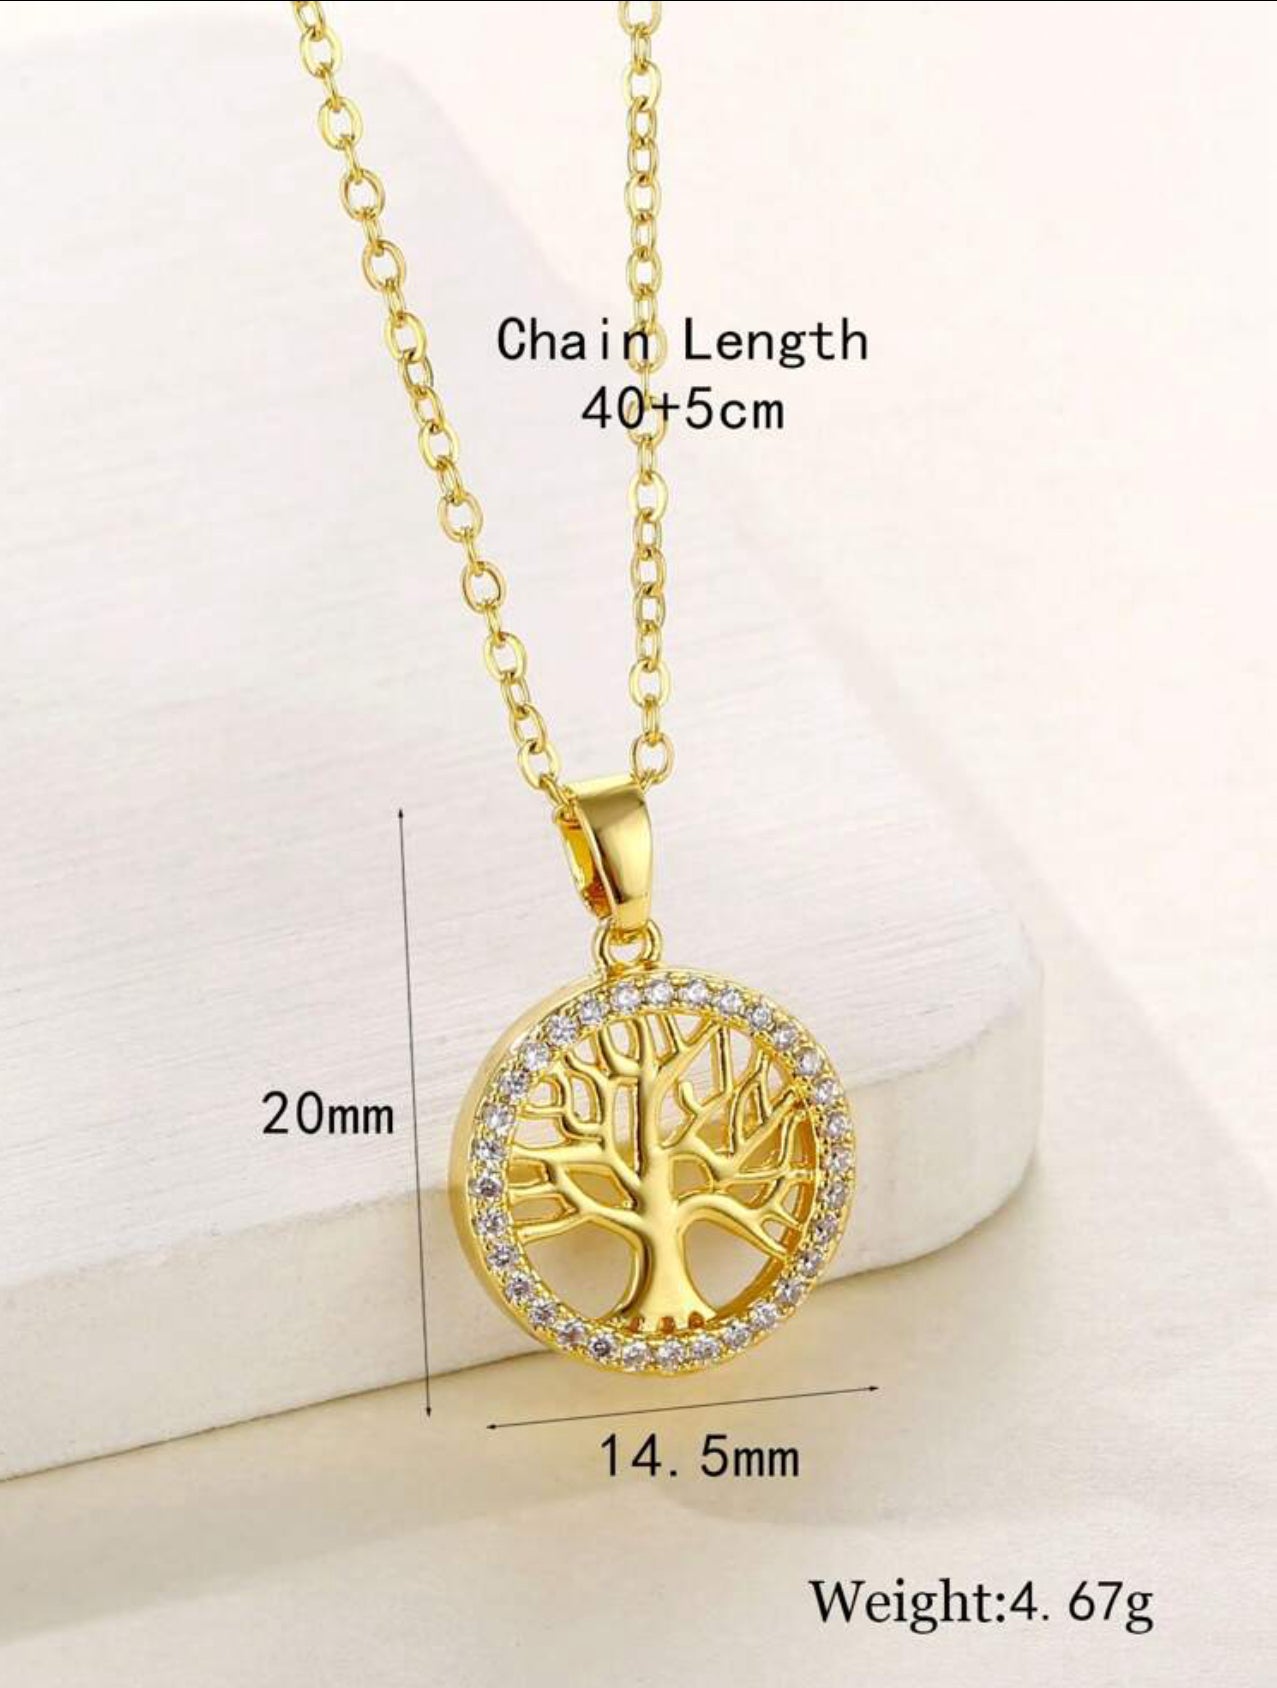 1pc European and American Style stainless steel Ring Celtic Love Tree Of Life Pendant Necklace